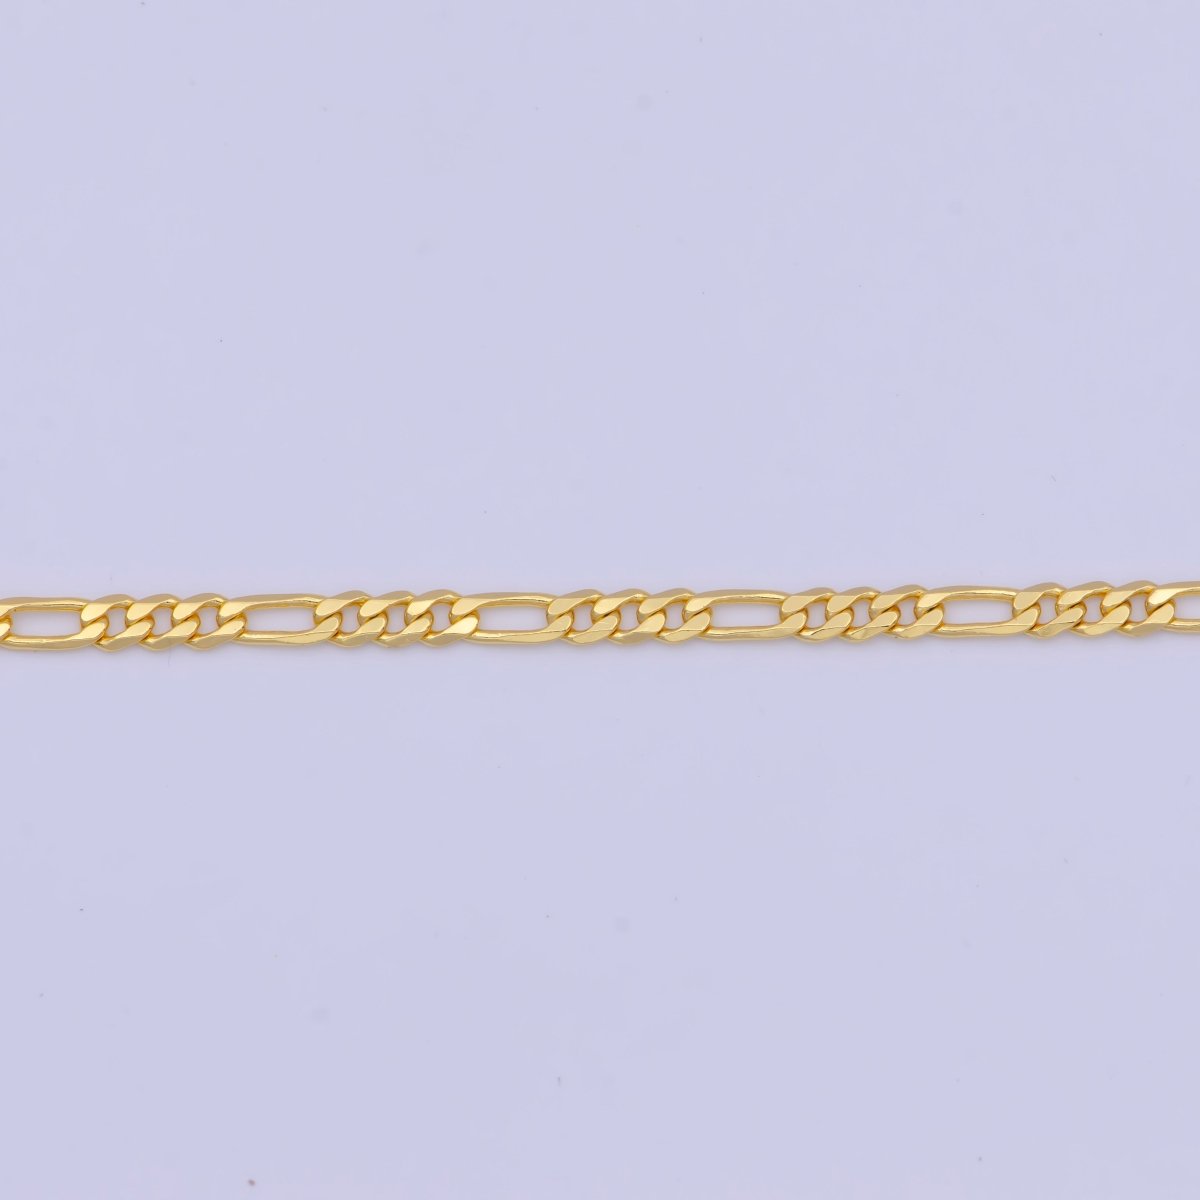 24K Gold Filled Dainty Figaro Chain Minimalist Necklace, Unisex Figaro Chain Necklace 2.4mm Width Ready to Wear | WA-1130 Clearance Pricing - DLUXCA